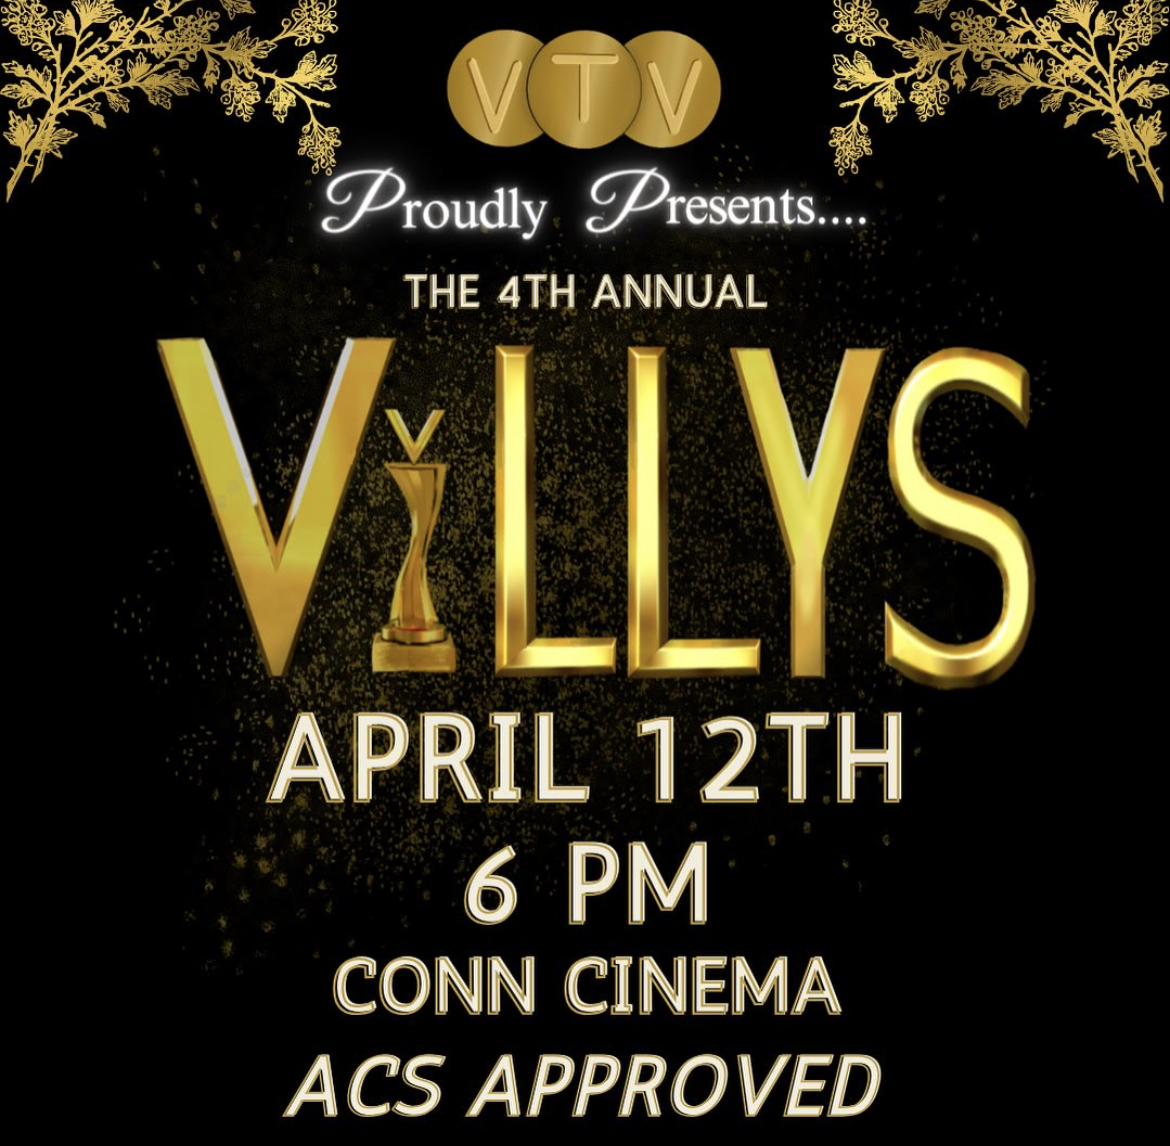 Villanova Television is holding the fourth annual Villys Film Festival on Apr. 12.